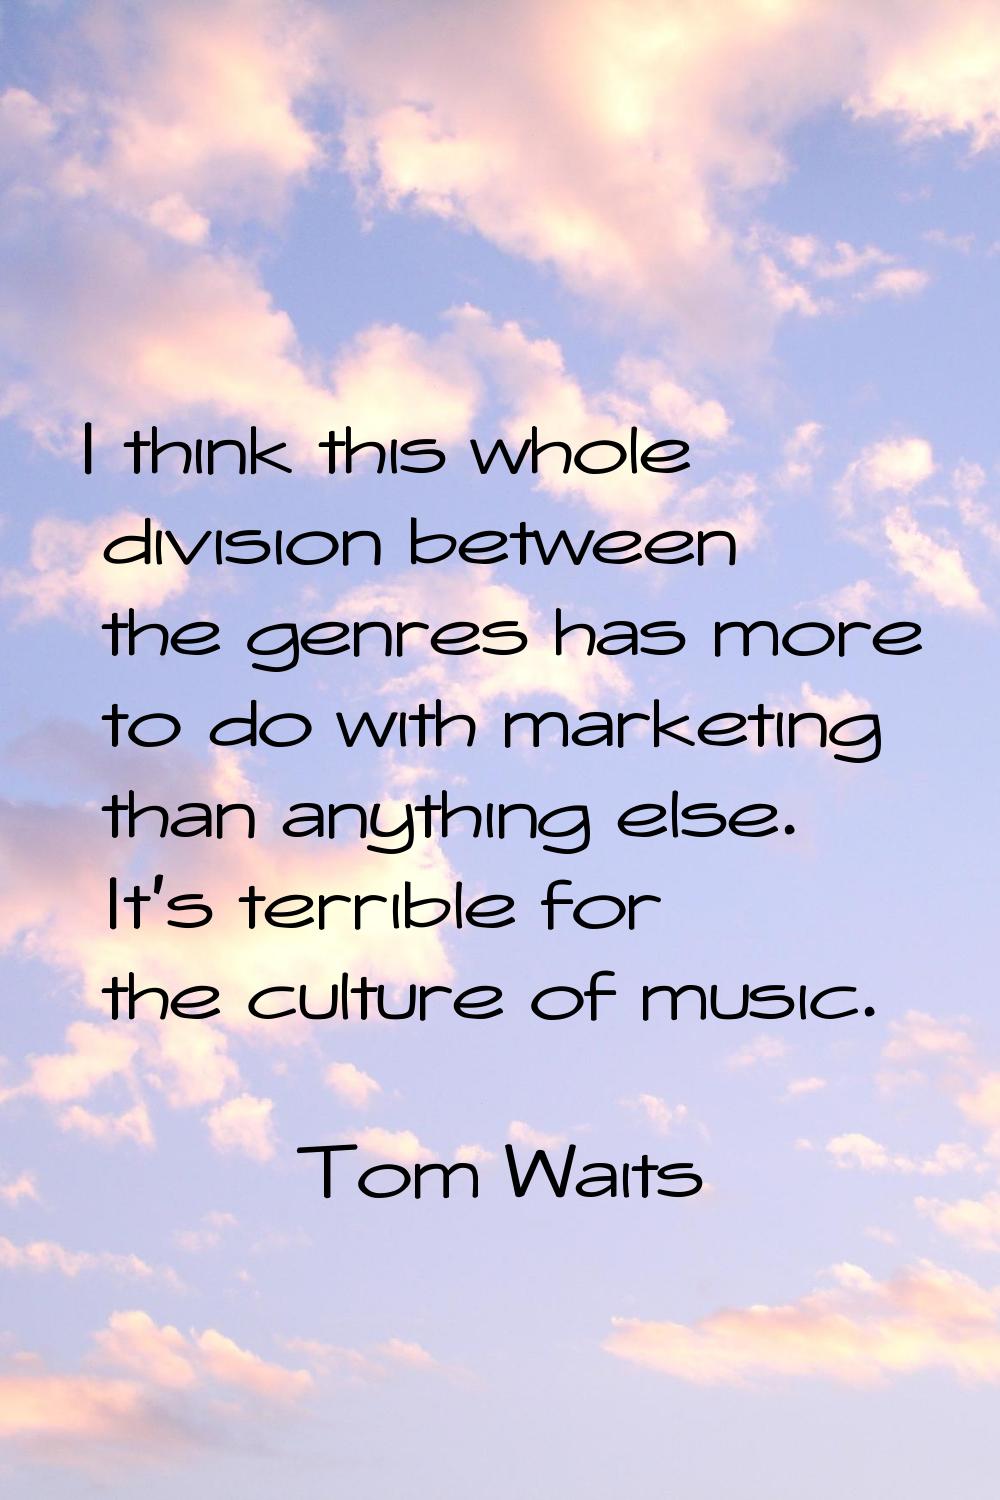 I think this whole division between the genres has more to do with marketing than anything else. It